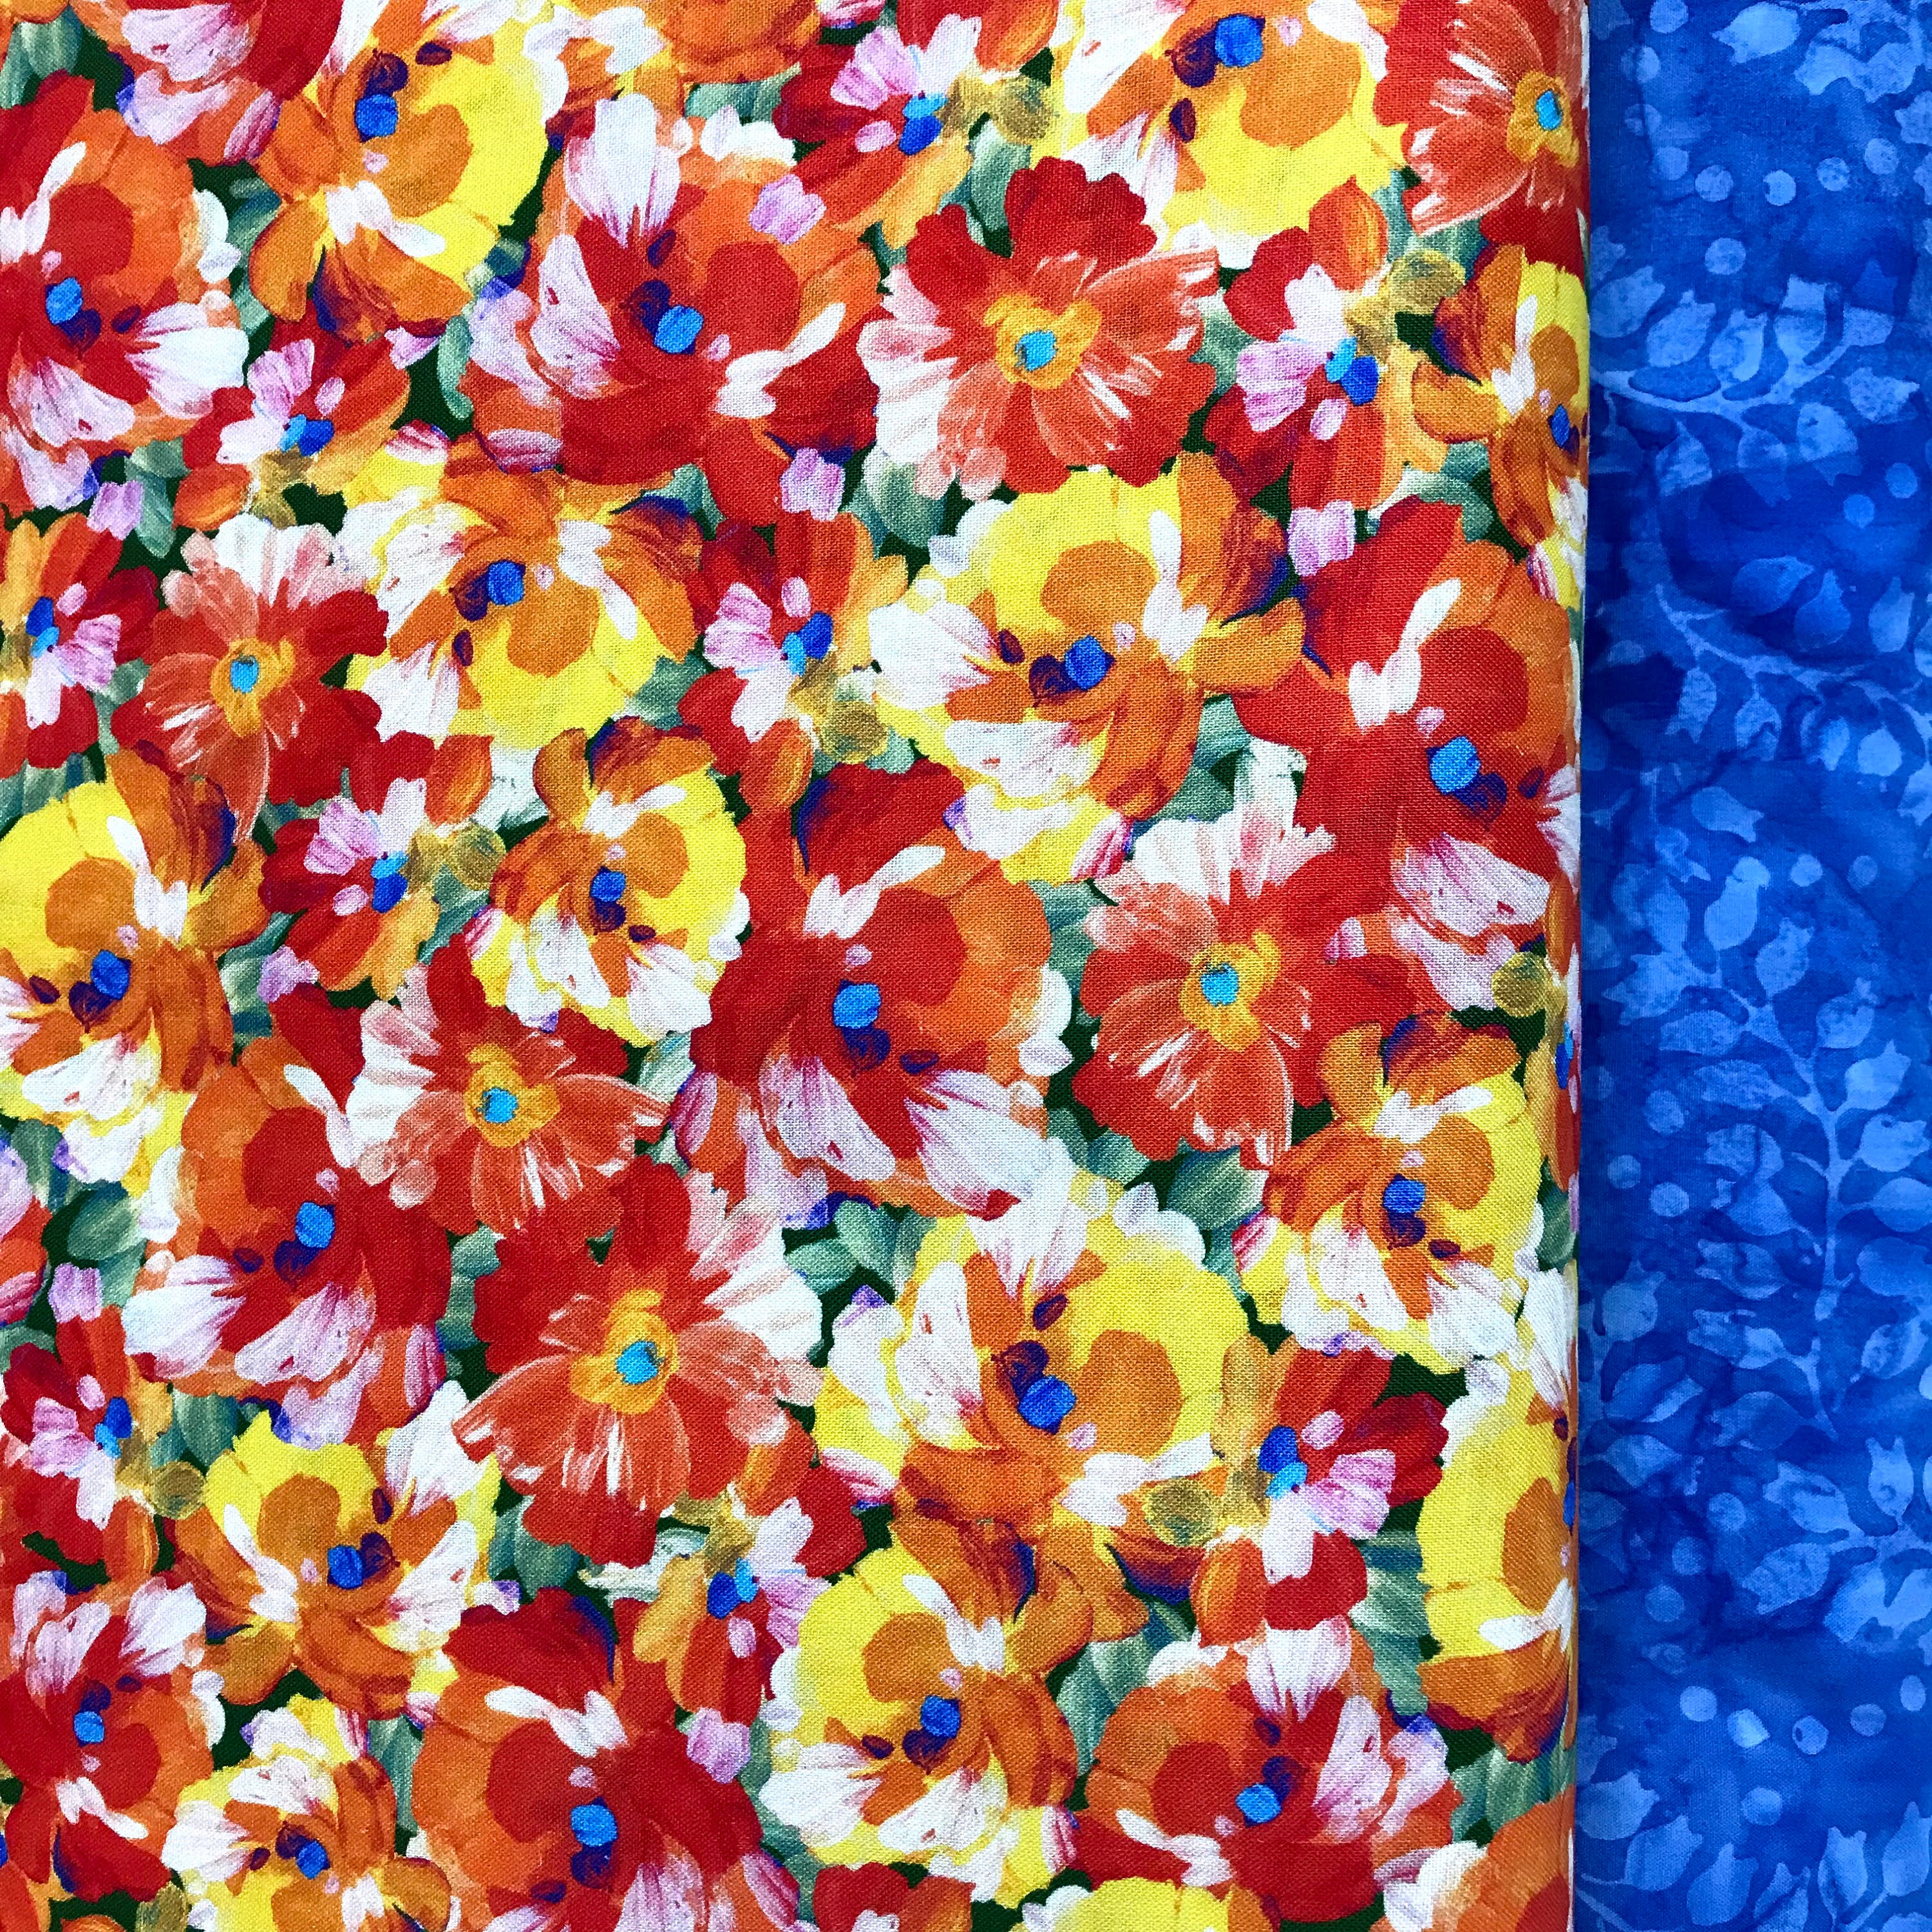 Quilting Fabric SRKD-19148-193 SUMMER from the Painterly Petals